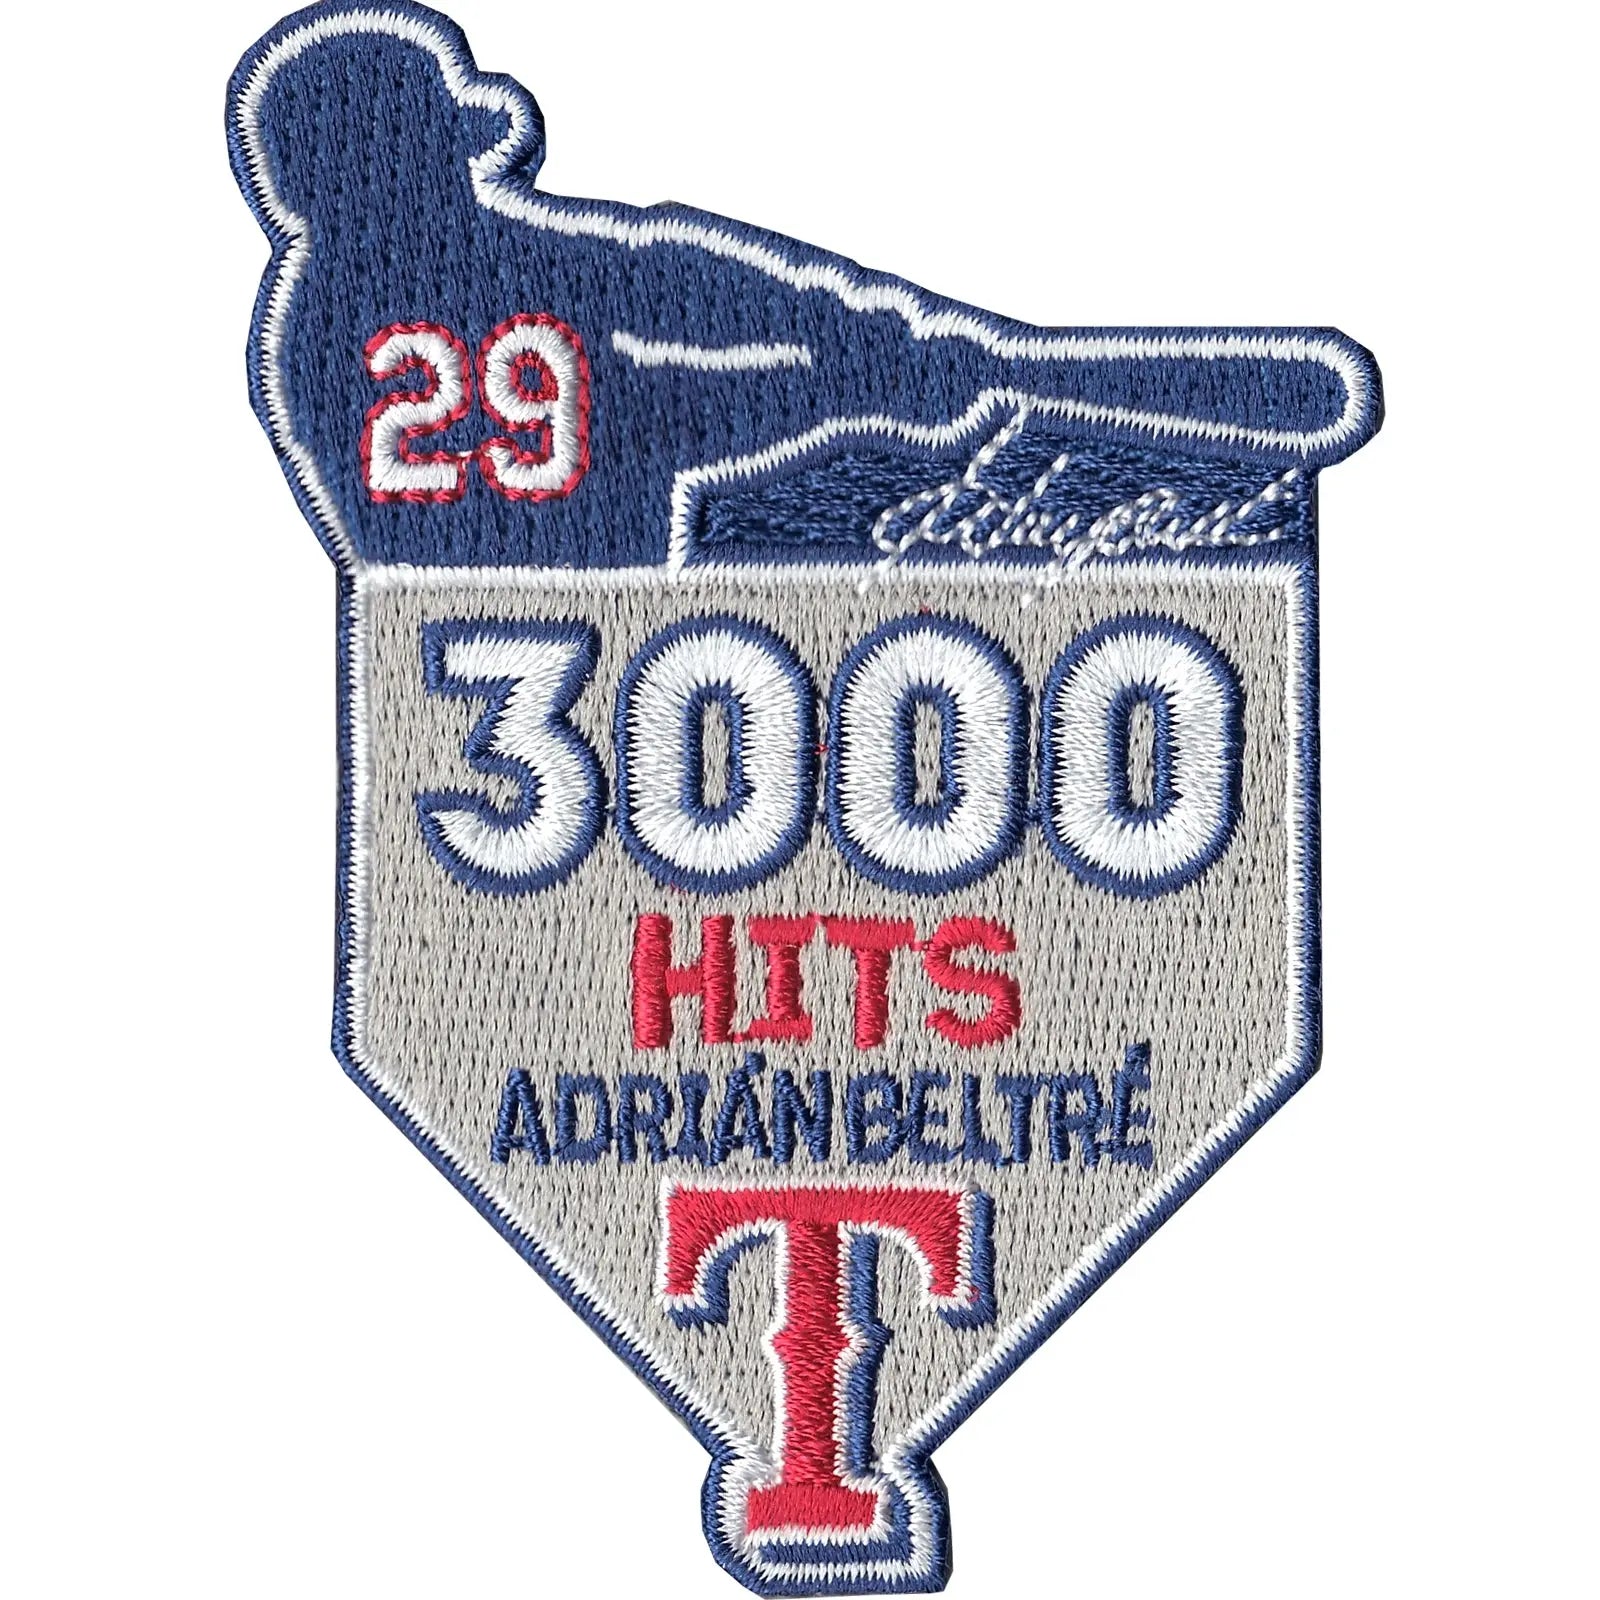 Texas Rangers Adrian Beltre 3000 Hits Signature Moment Patch 